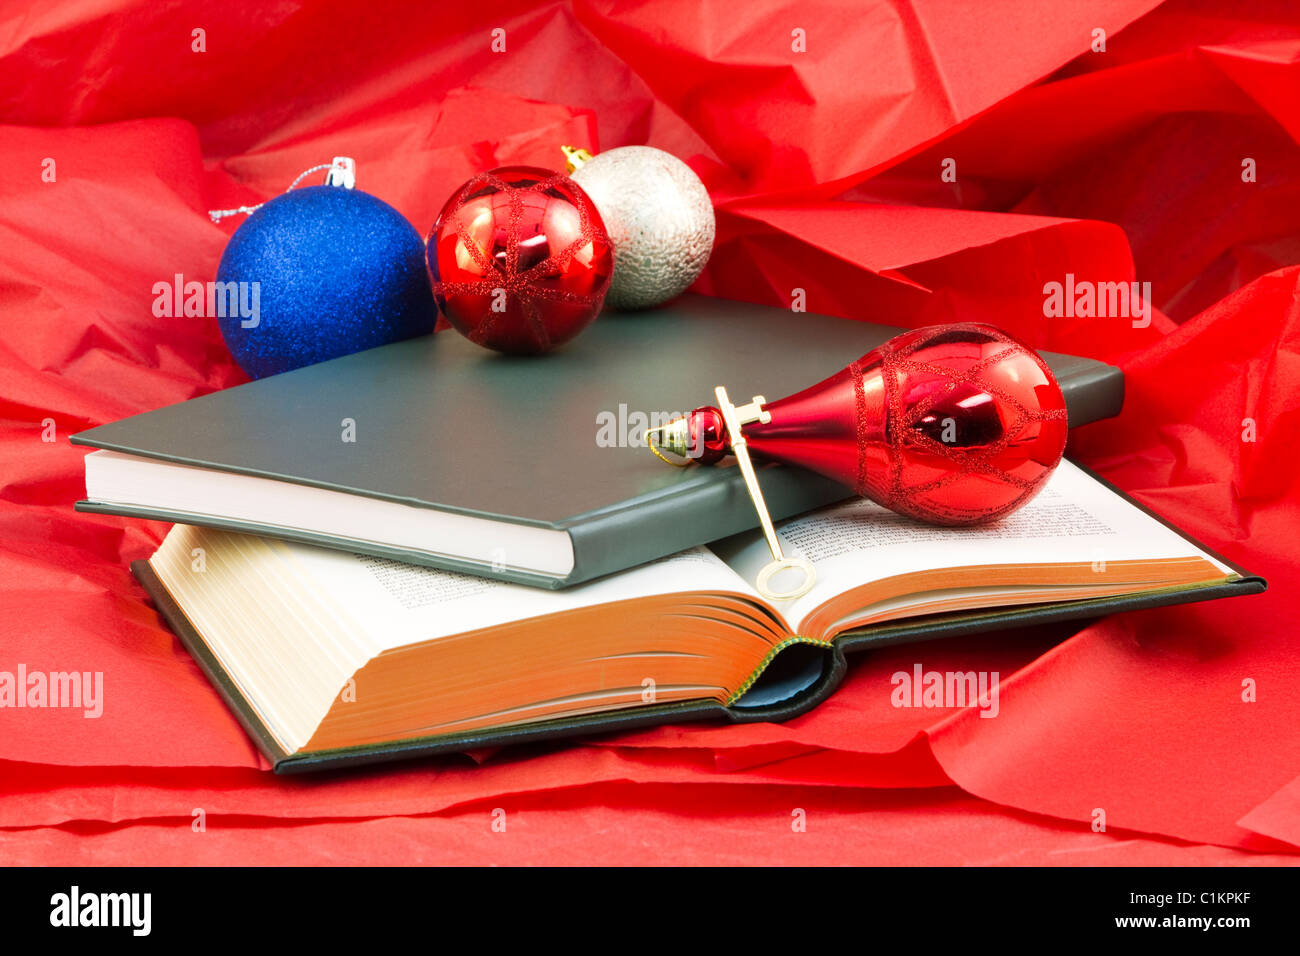 Golden key and open book and closed book on red paper with holiday ornaments reflect the gift that opens knowledge Stock Photo